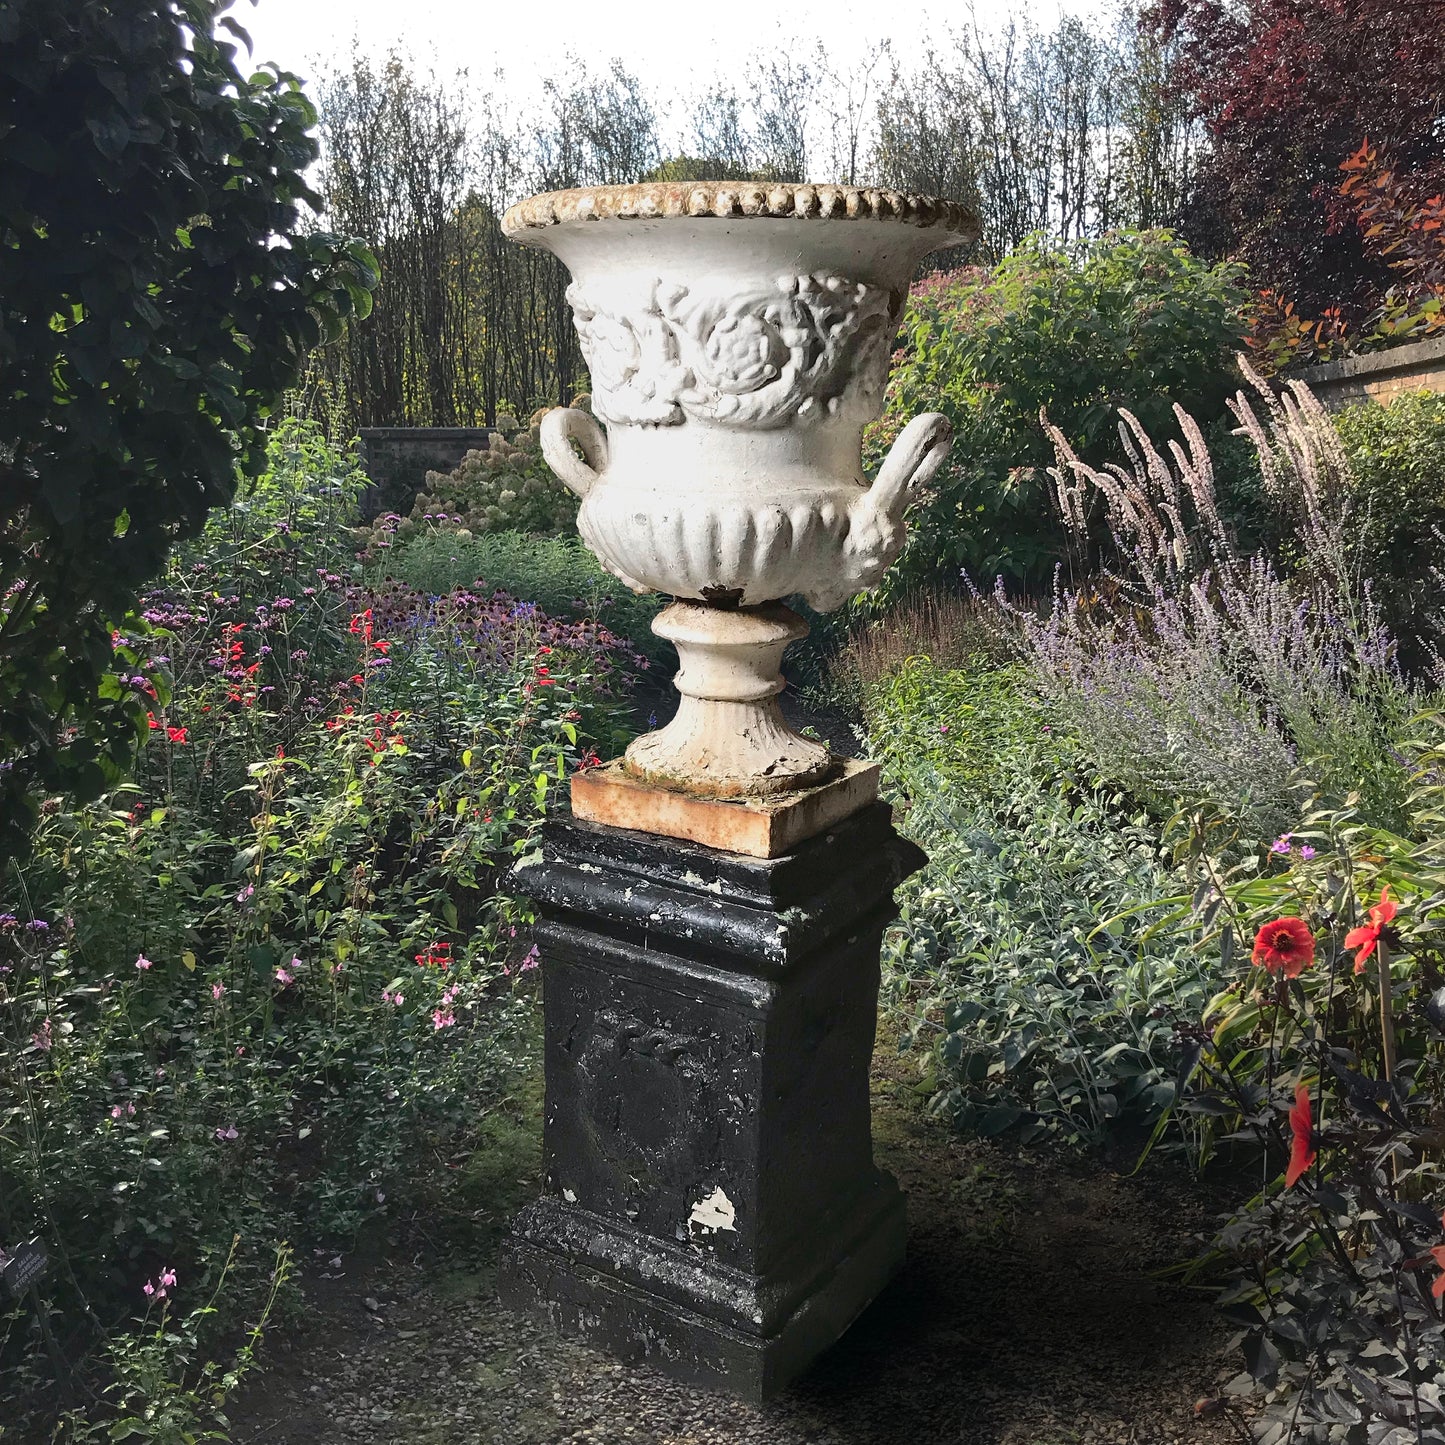 English Campana Cast Iron Urn by Andrew Handyside Co. c.1870